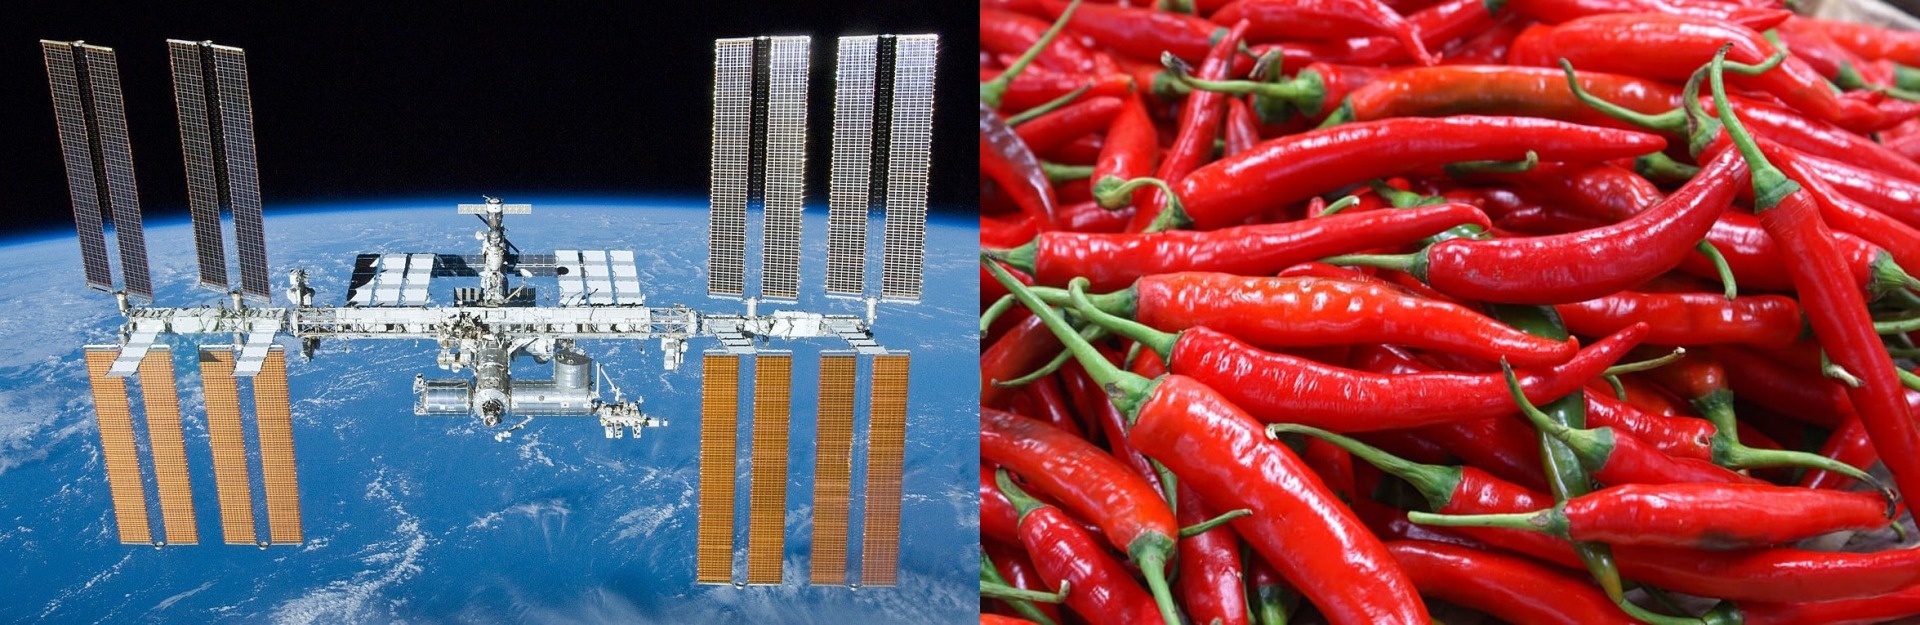 New Scientific Breakthrough: NASA Grew and Harvested Chili Peppers in Space